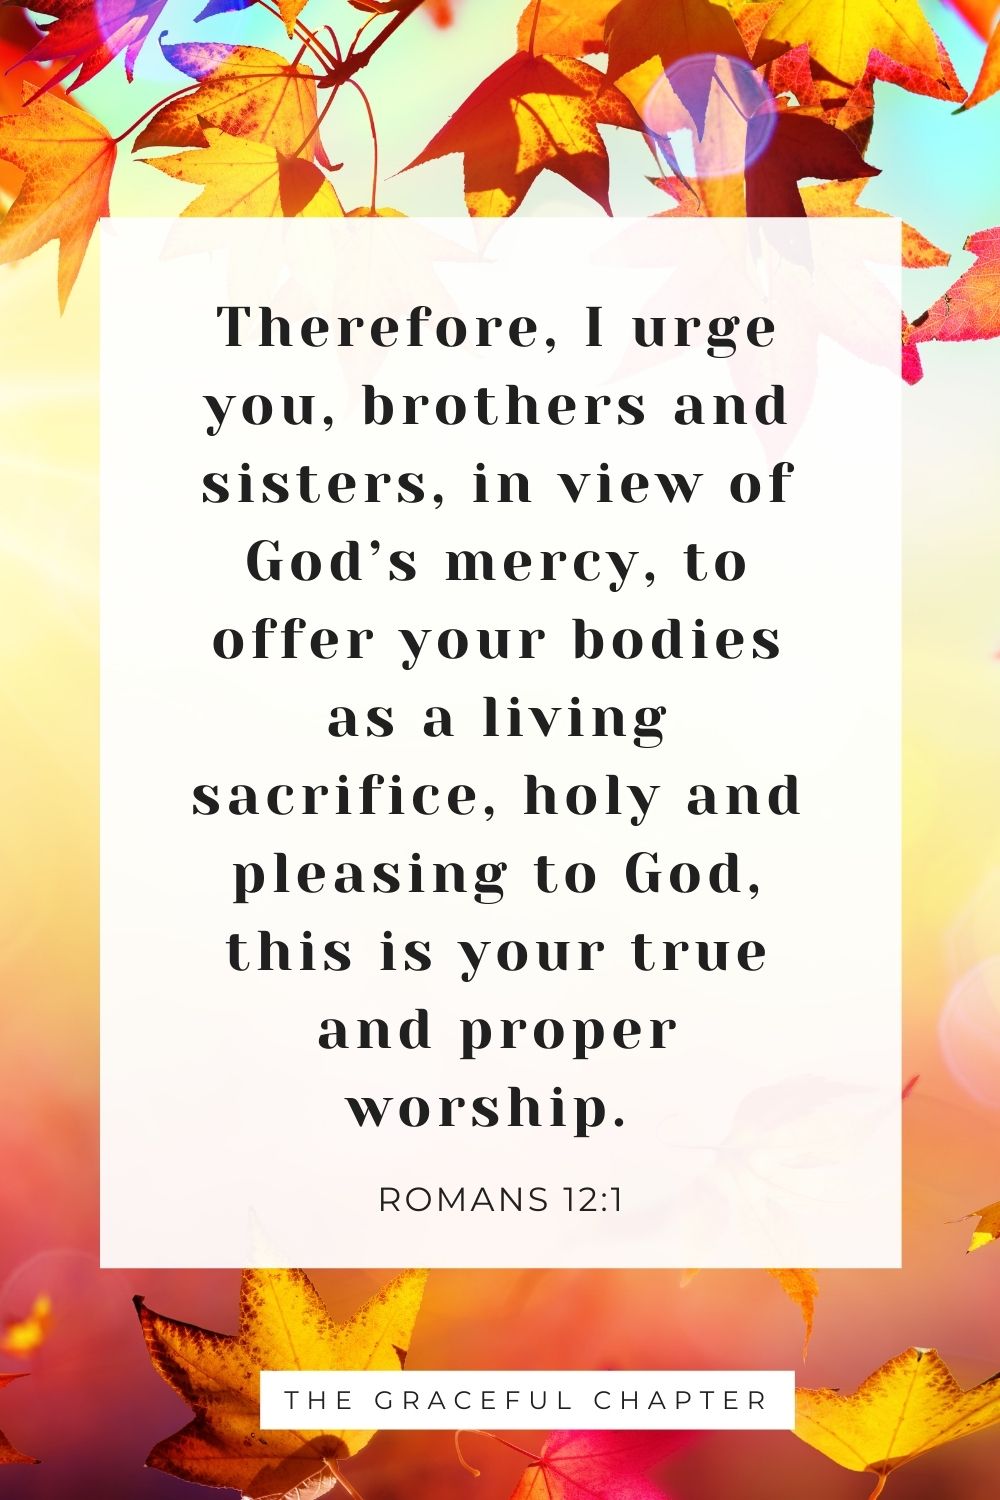 Therefore, I urge you, brothers and sisters, in view of God’s mercy, to offer your bodies as a living sacrifice, holy and pleasing to God, this is your true and proper worship. Romans 12:1